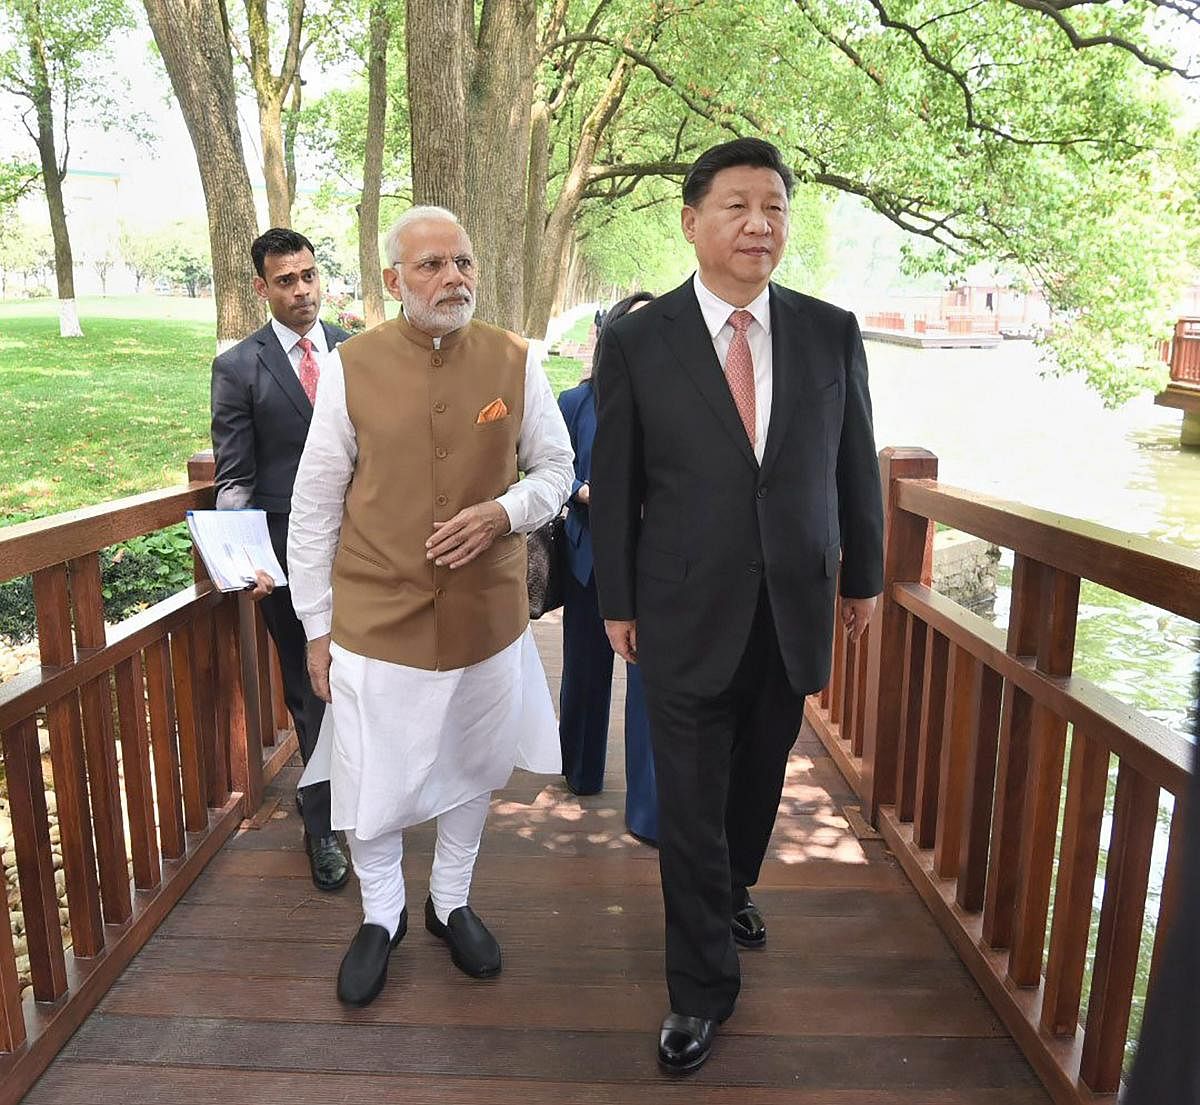 Xi, who hosted an unprecedented two-day "informal summit" with visiting Prime Minister Narendra Modi in the central Chinese city of Wuhan, said that China and India are both important engines of the world economic growth.